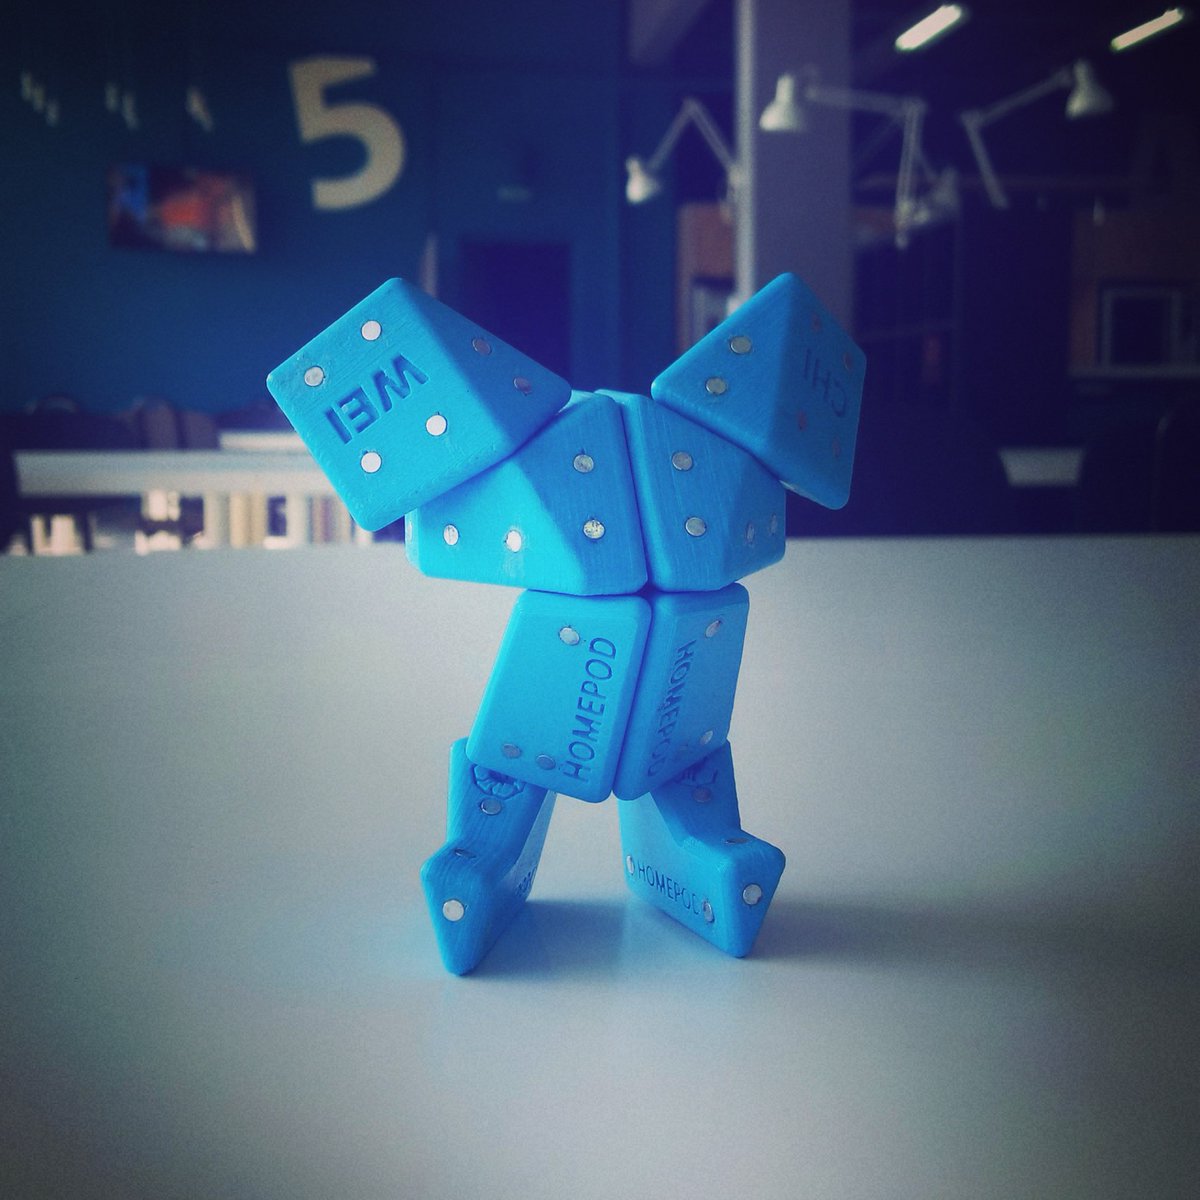 We've engineered a toy and we are looking for #crowdfunding If you are interested, let us know link here - homepod.eu/en/play  -  #startups #iasi #romania #toys #games #puzzle #magnetic #3dprint #fablab #makers #3dmakers #reprap #prusa #3d #makeitfast